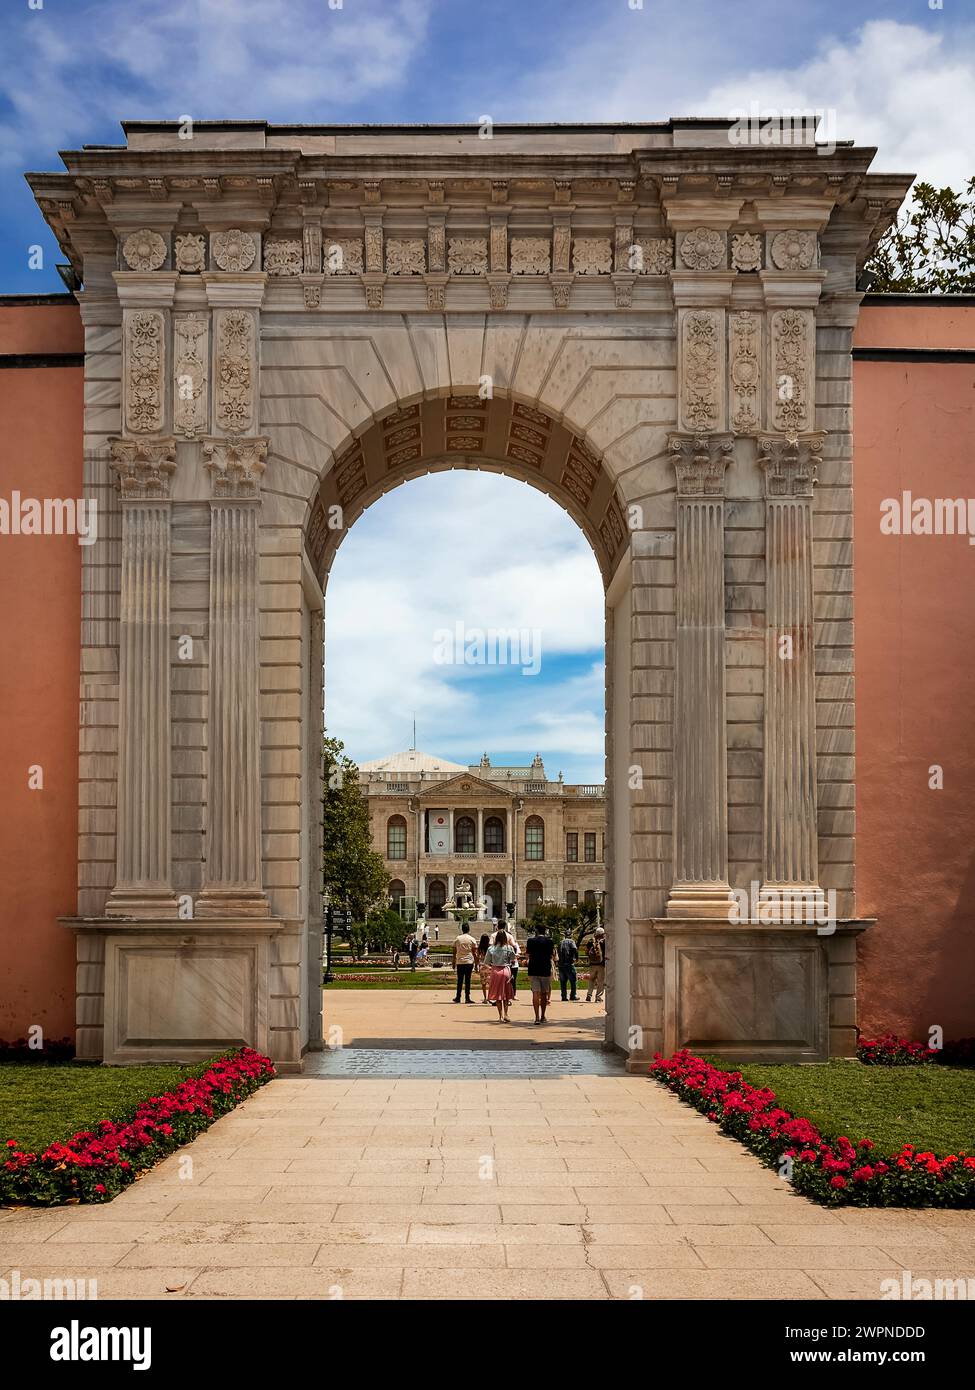 an inlaid marble arch leads the guest to the majestic gardens of the Dolmabahce Palace, located at the end of the path Stock Photo